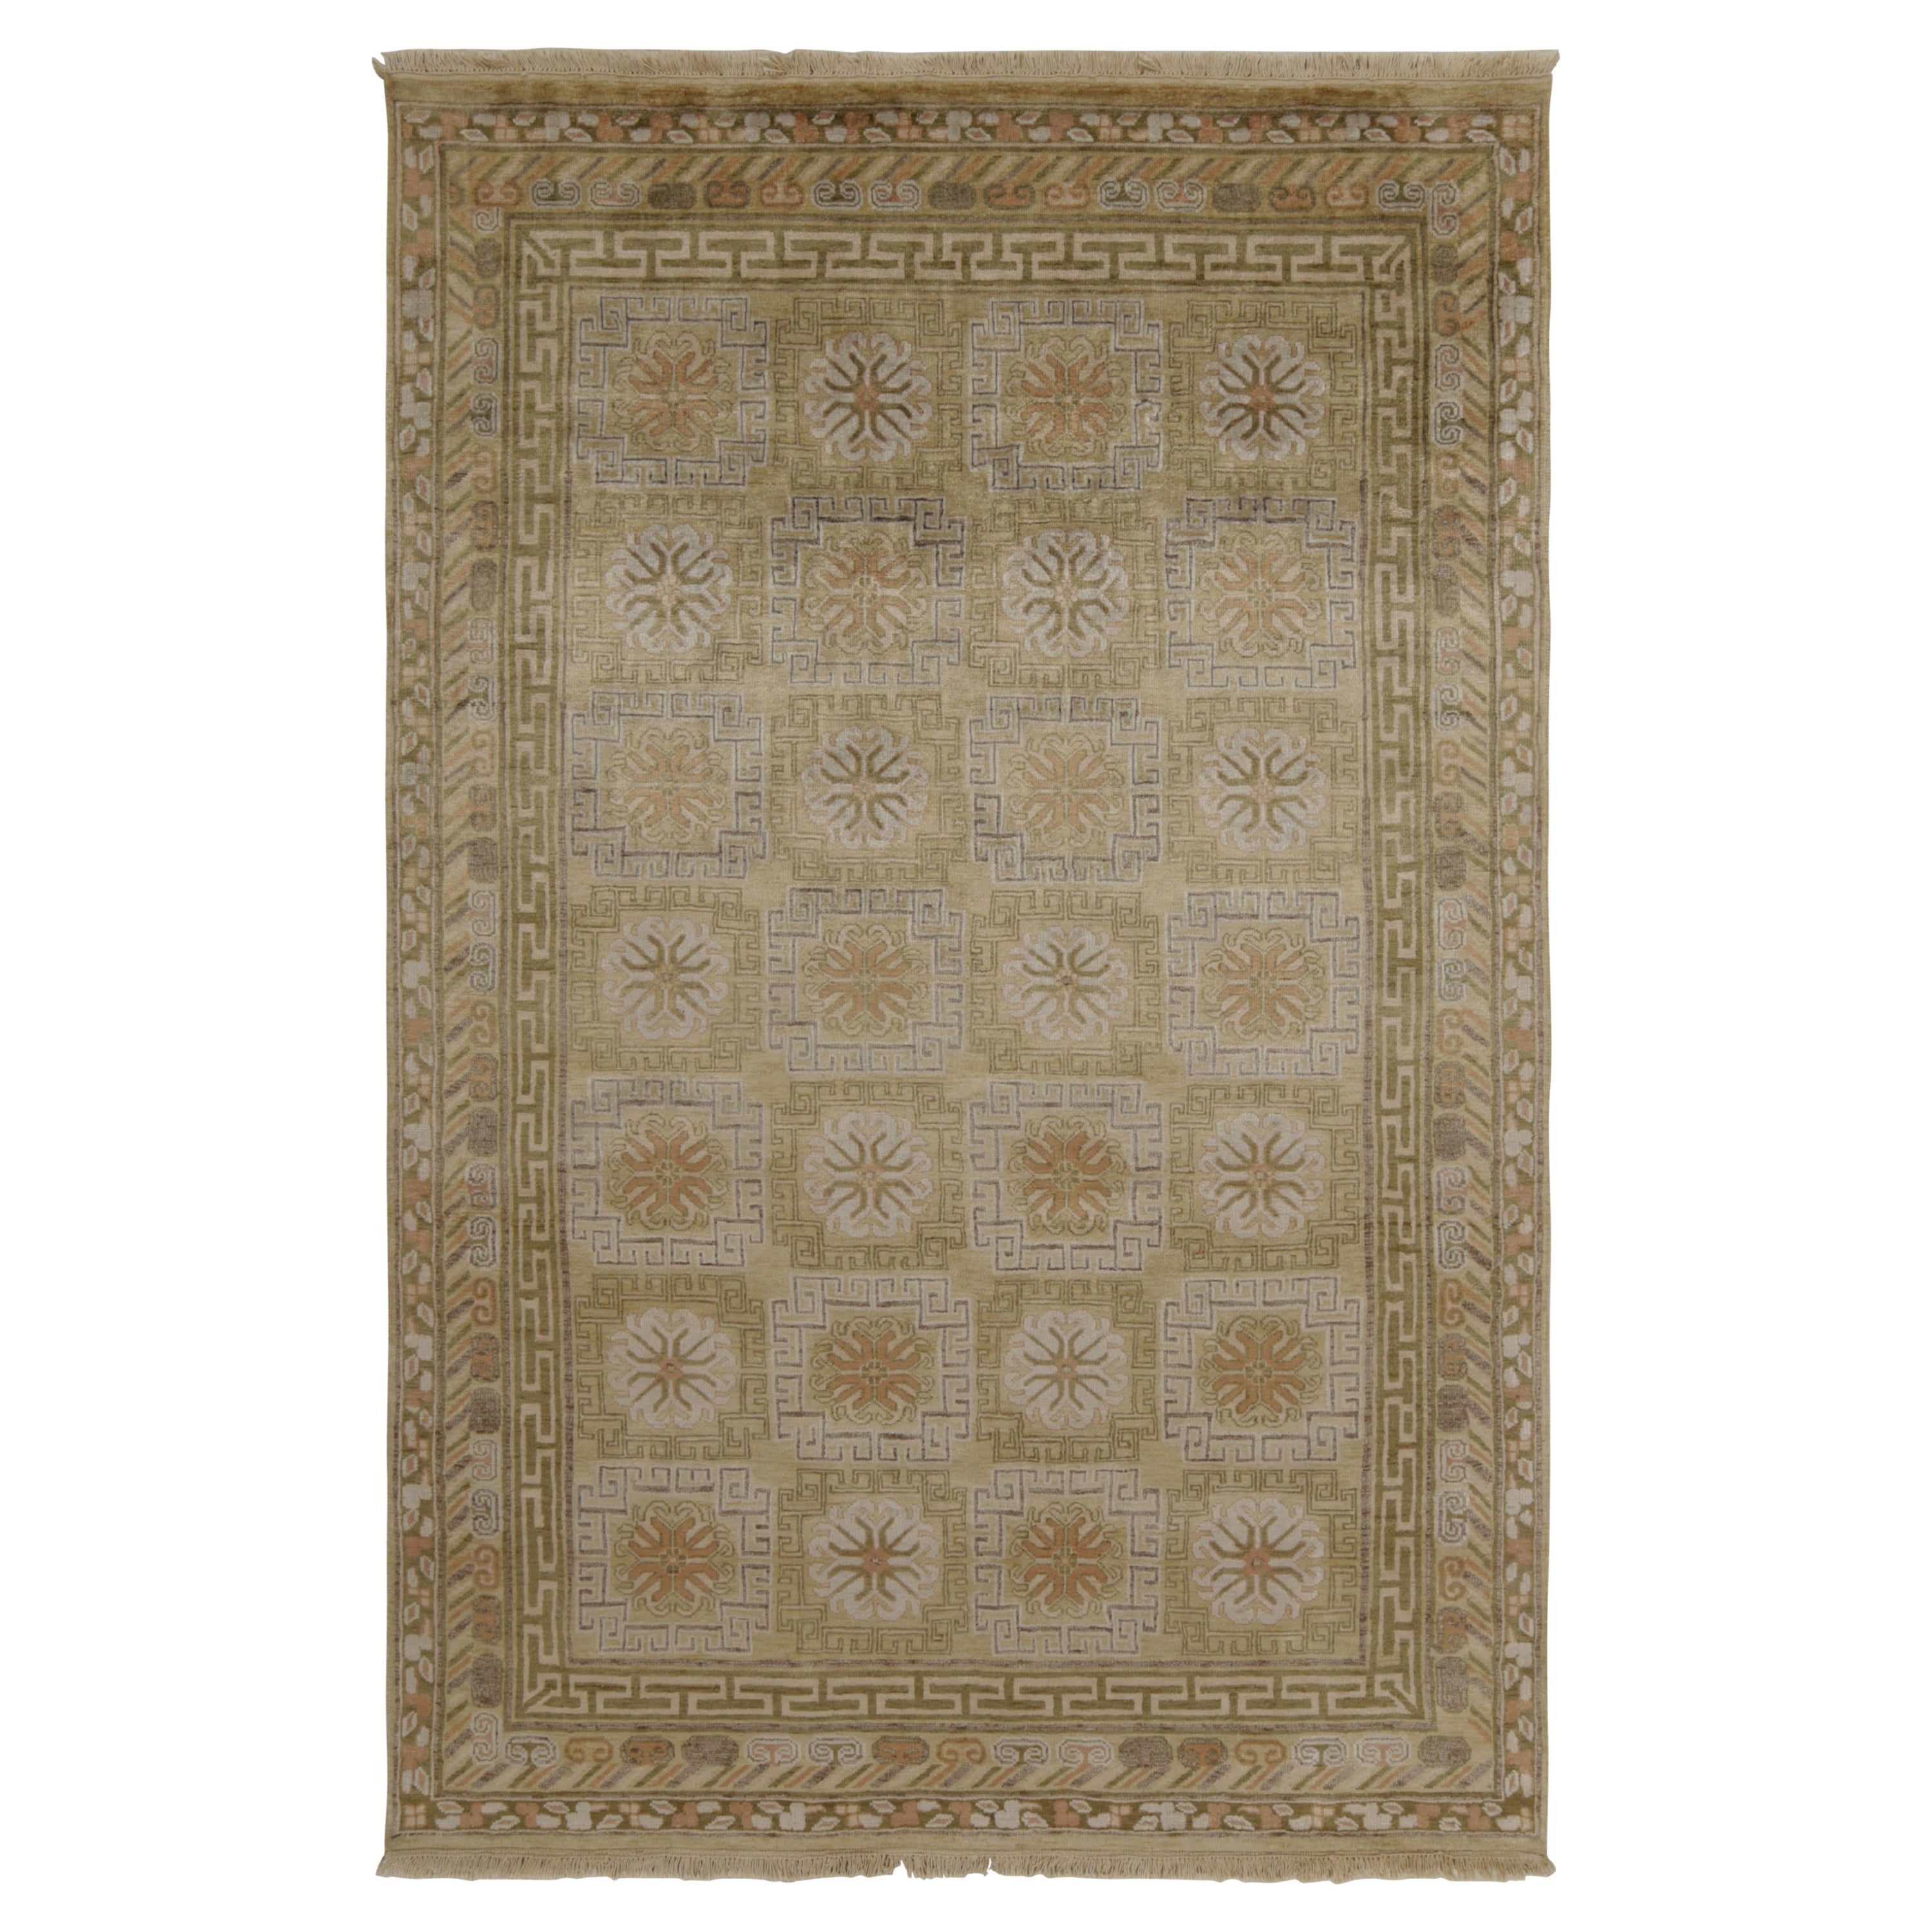 Rug & Kilim’s Khotan style rug in Gold and Beige-Brown Geometric Patterns For Sale